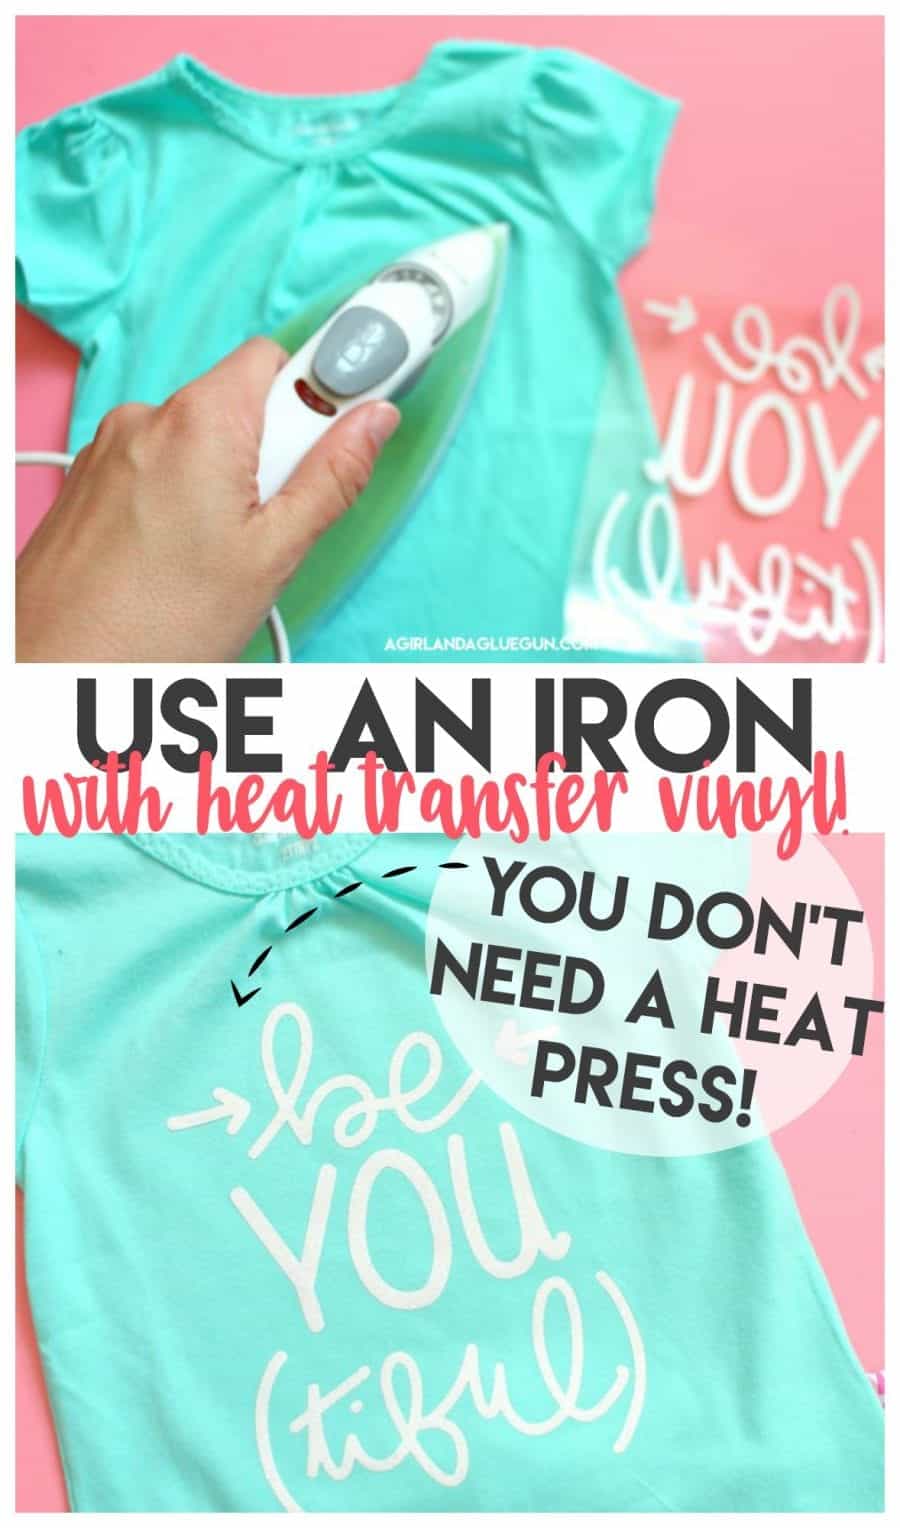 How to apply Heat transfer vinyl with an Iron! - A girl and a glue gun